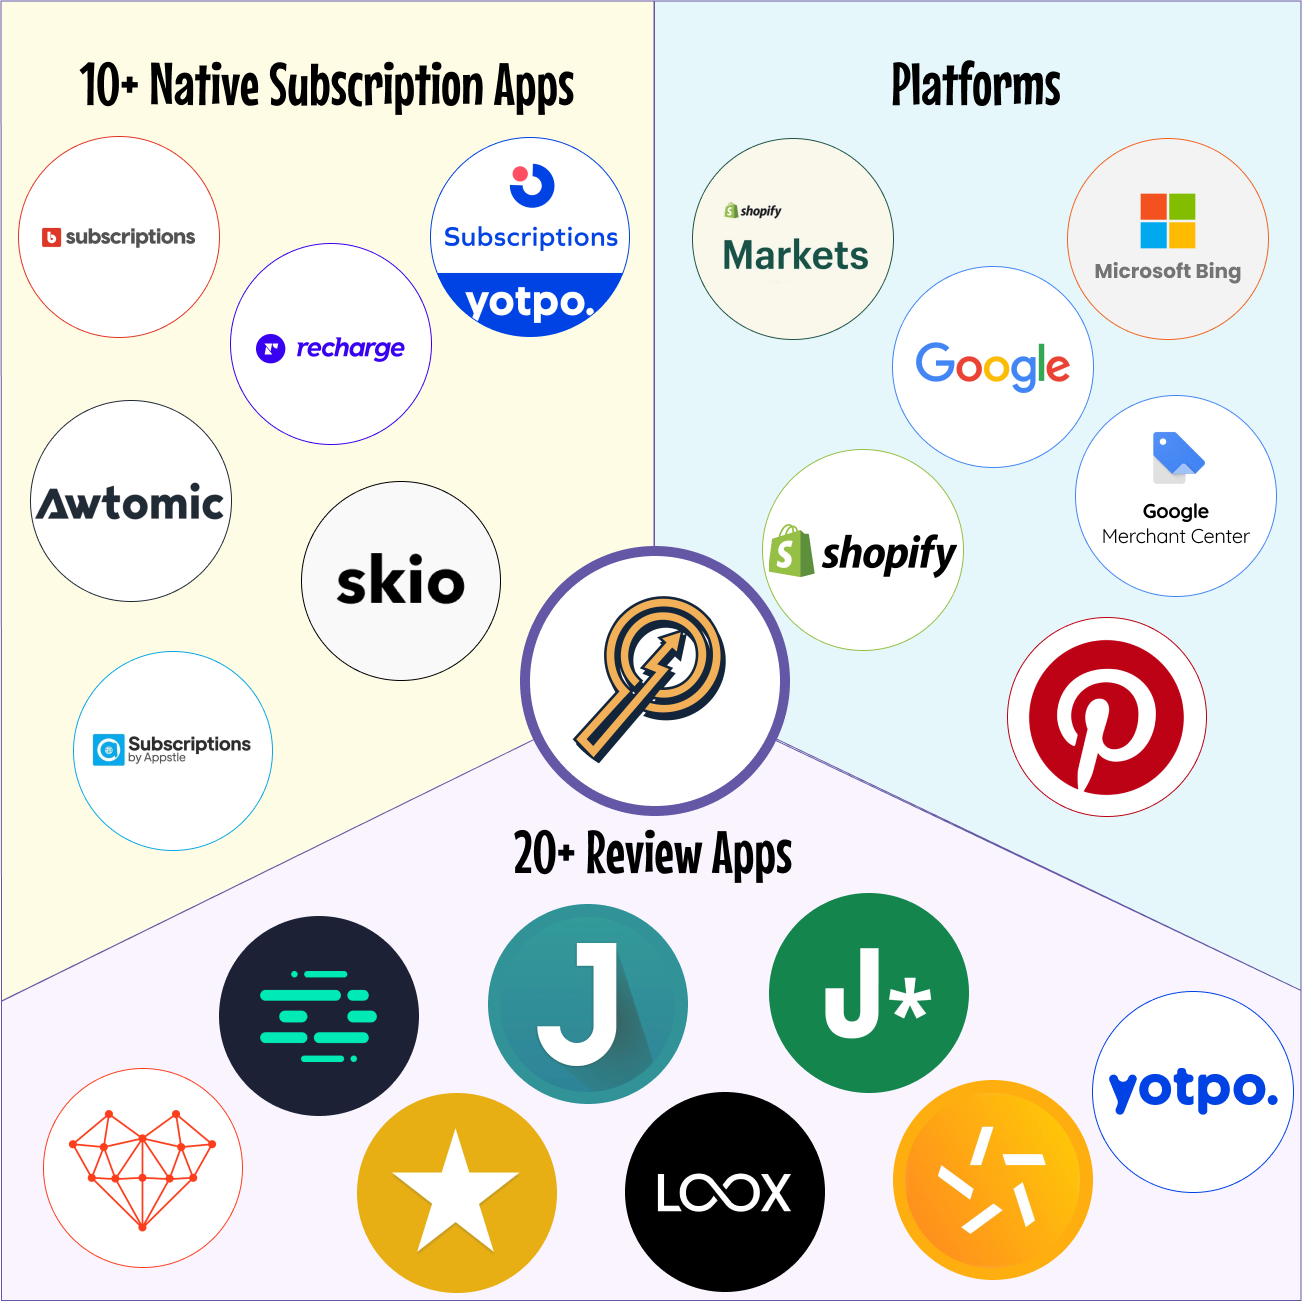 graphical representation of integrations such as 20+ review apps, 10+ native subscription apps, and platforms